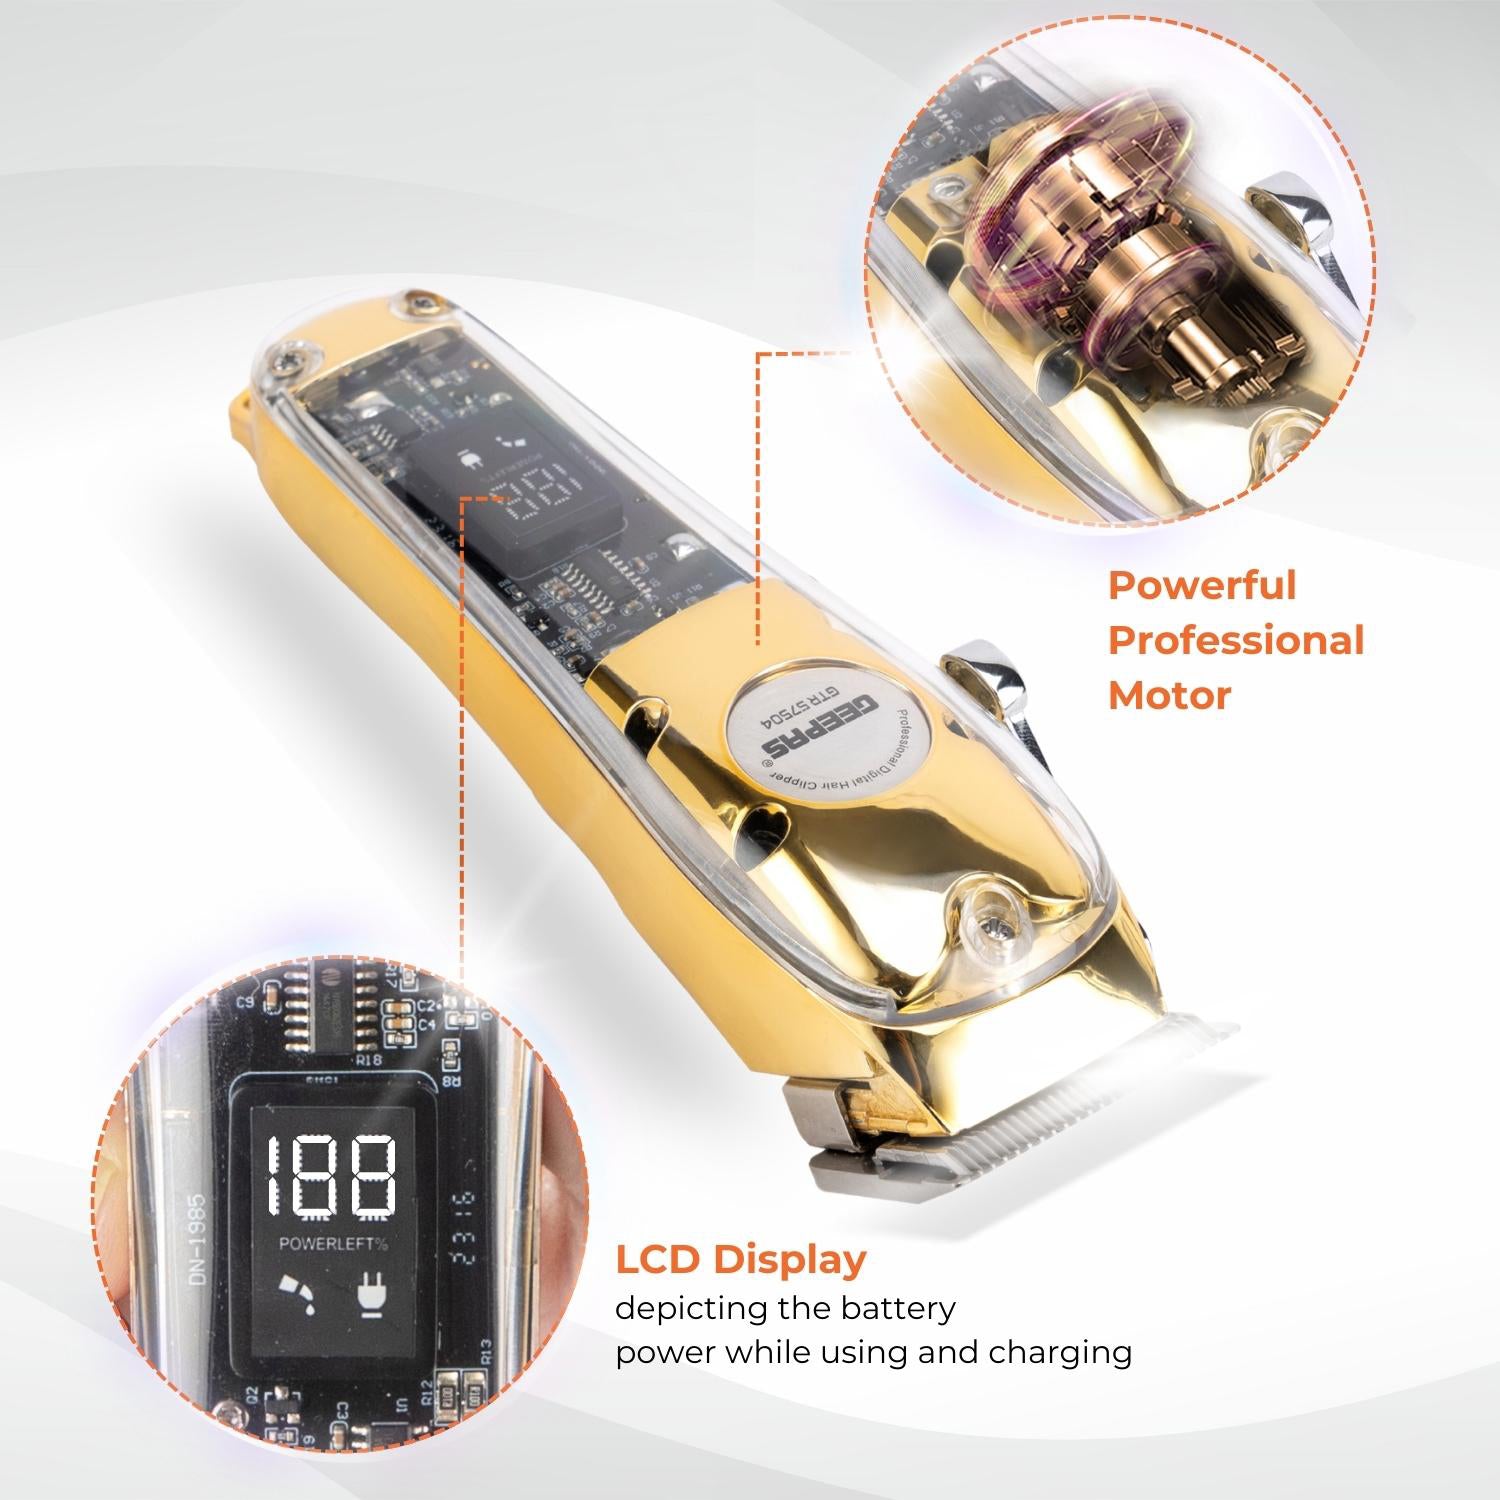 Transparent Gold Rechargeable Professional Trimmer and Shaver